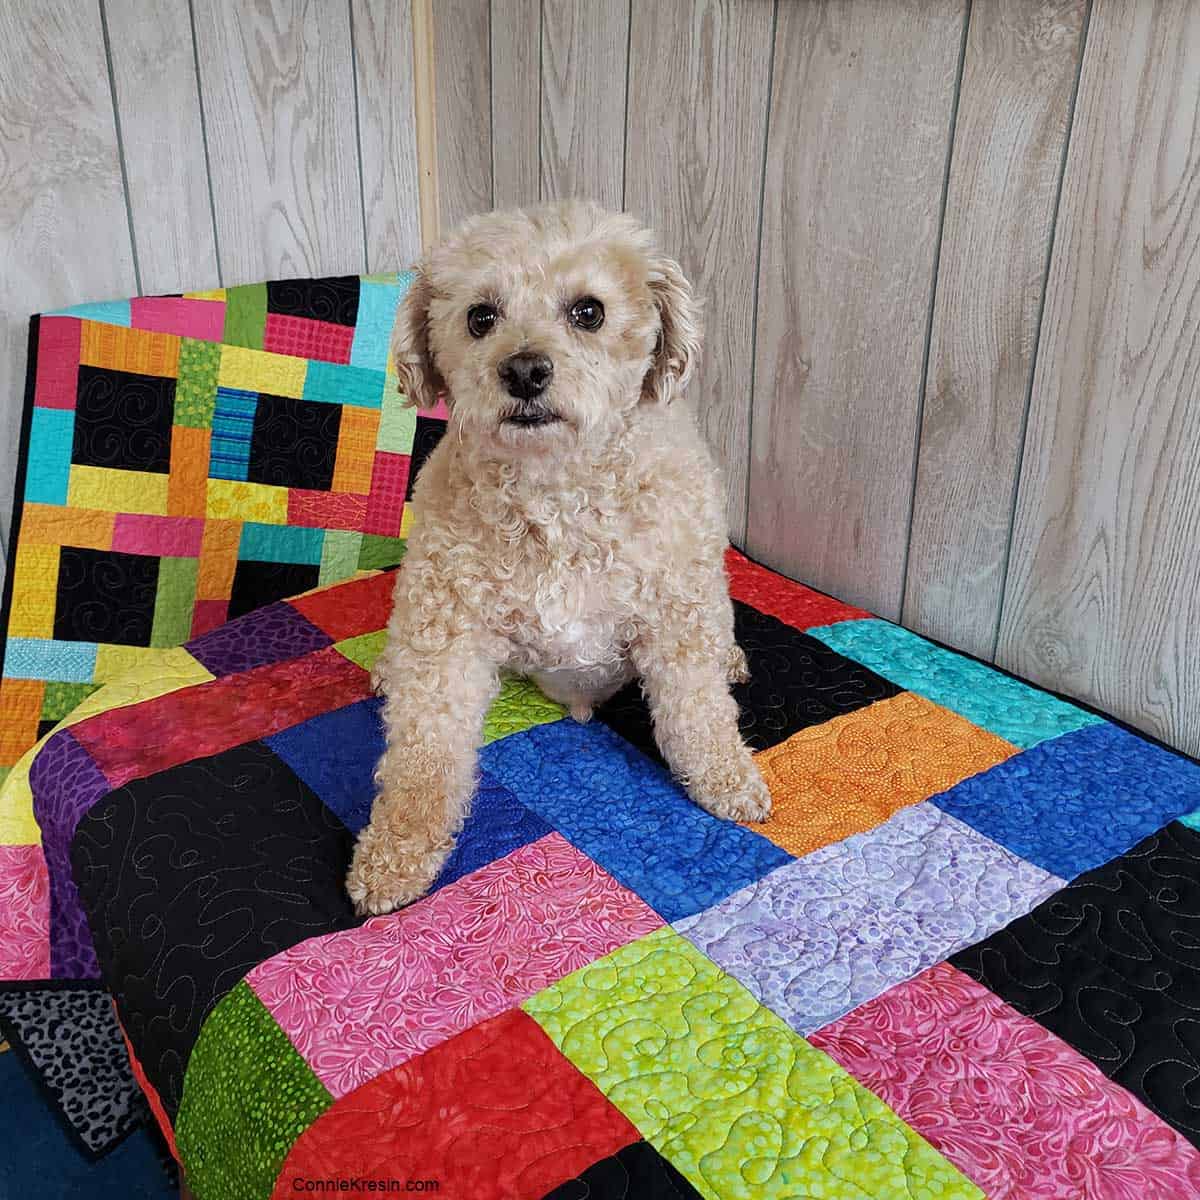 Dog on the Midnight Glow lap quilt and baby quilt behind